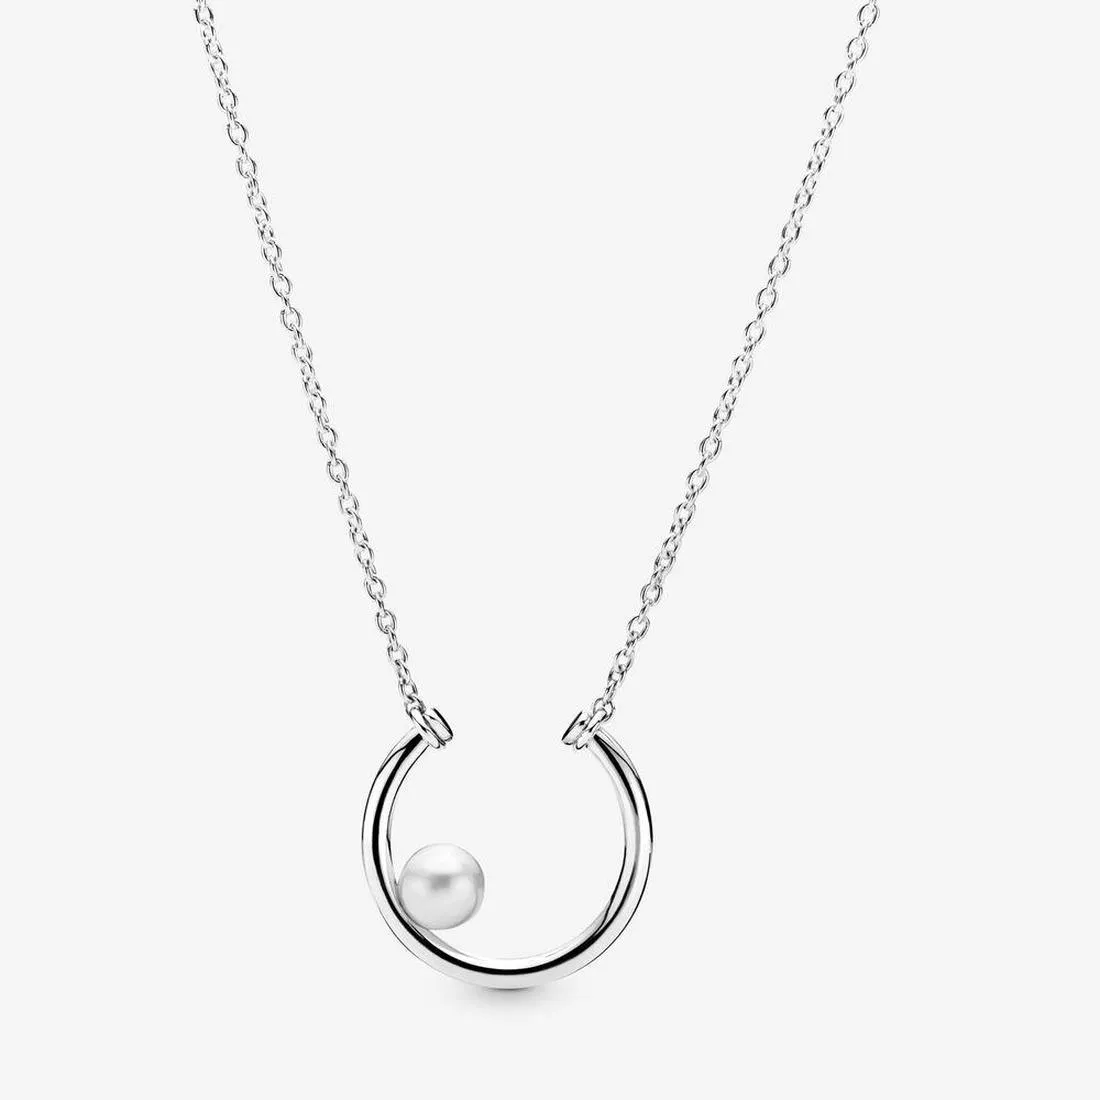 Designer Jewelry 925 Silver Necklace heart Pendant fit Pandora Offset Freshwater Cultured Pearl Circle love Necklaces European Style Charms Bead Murano